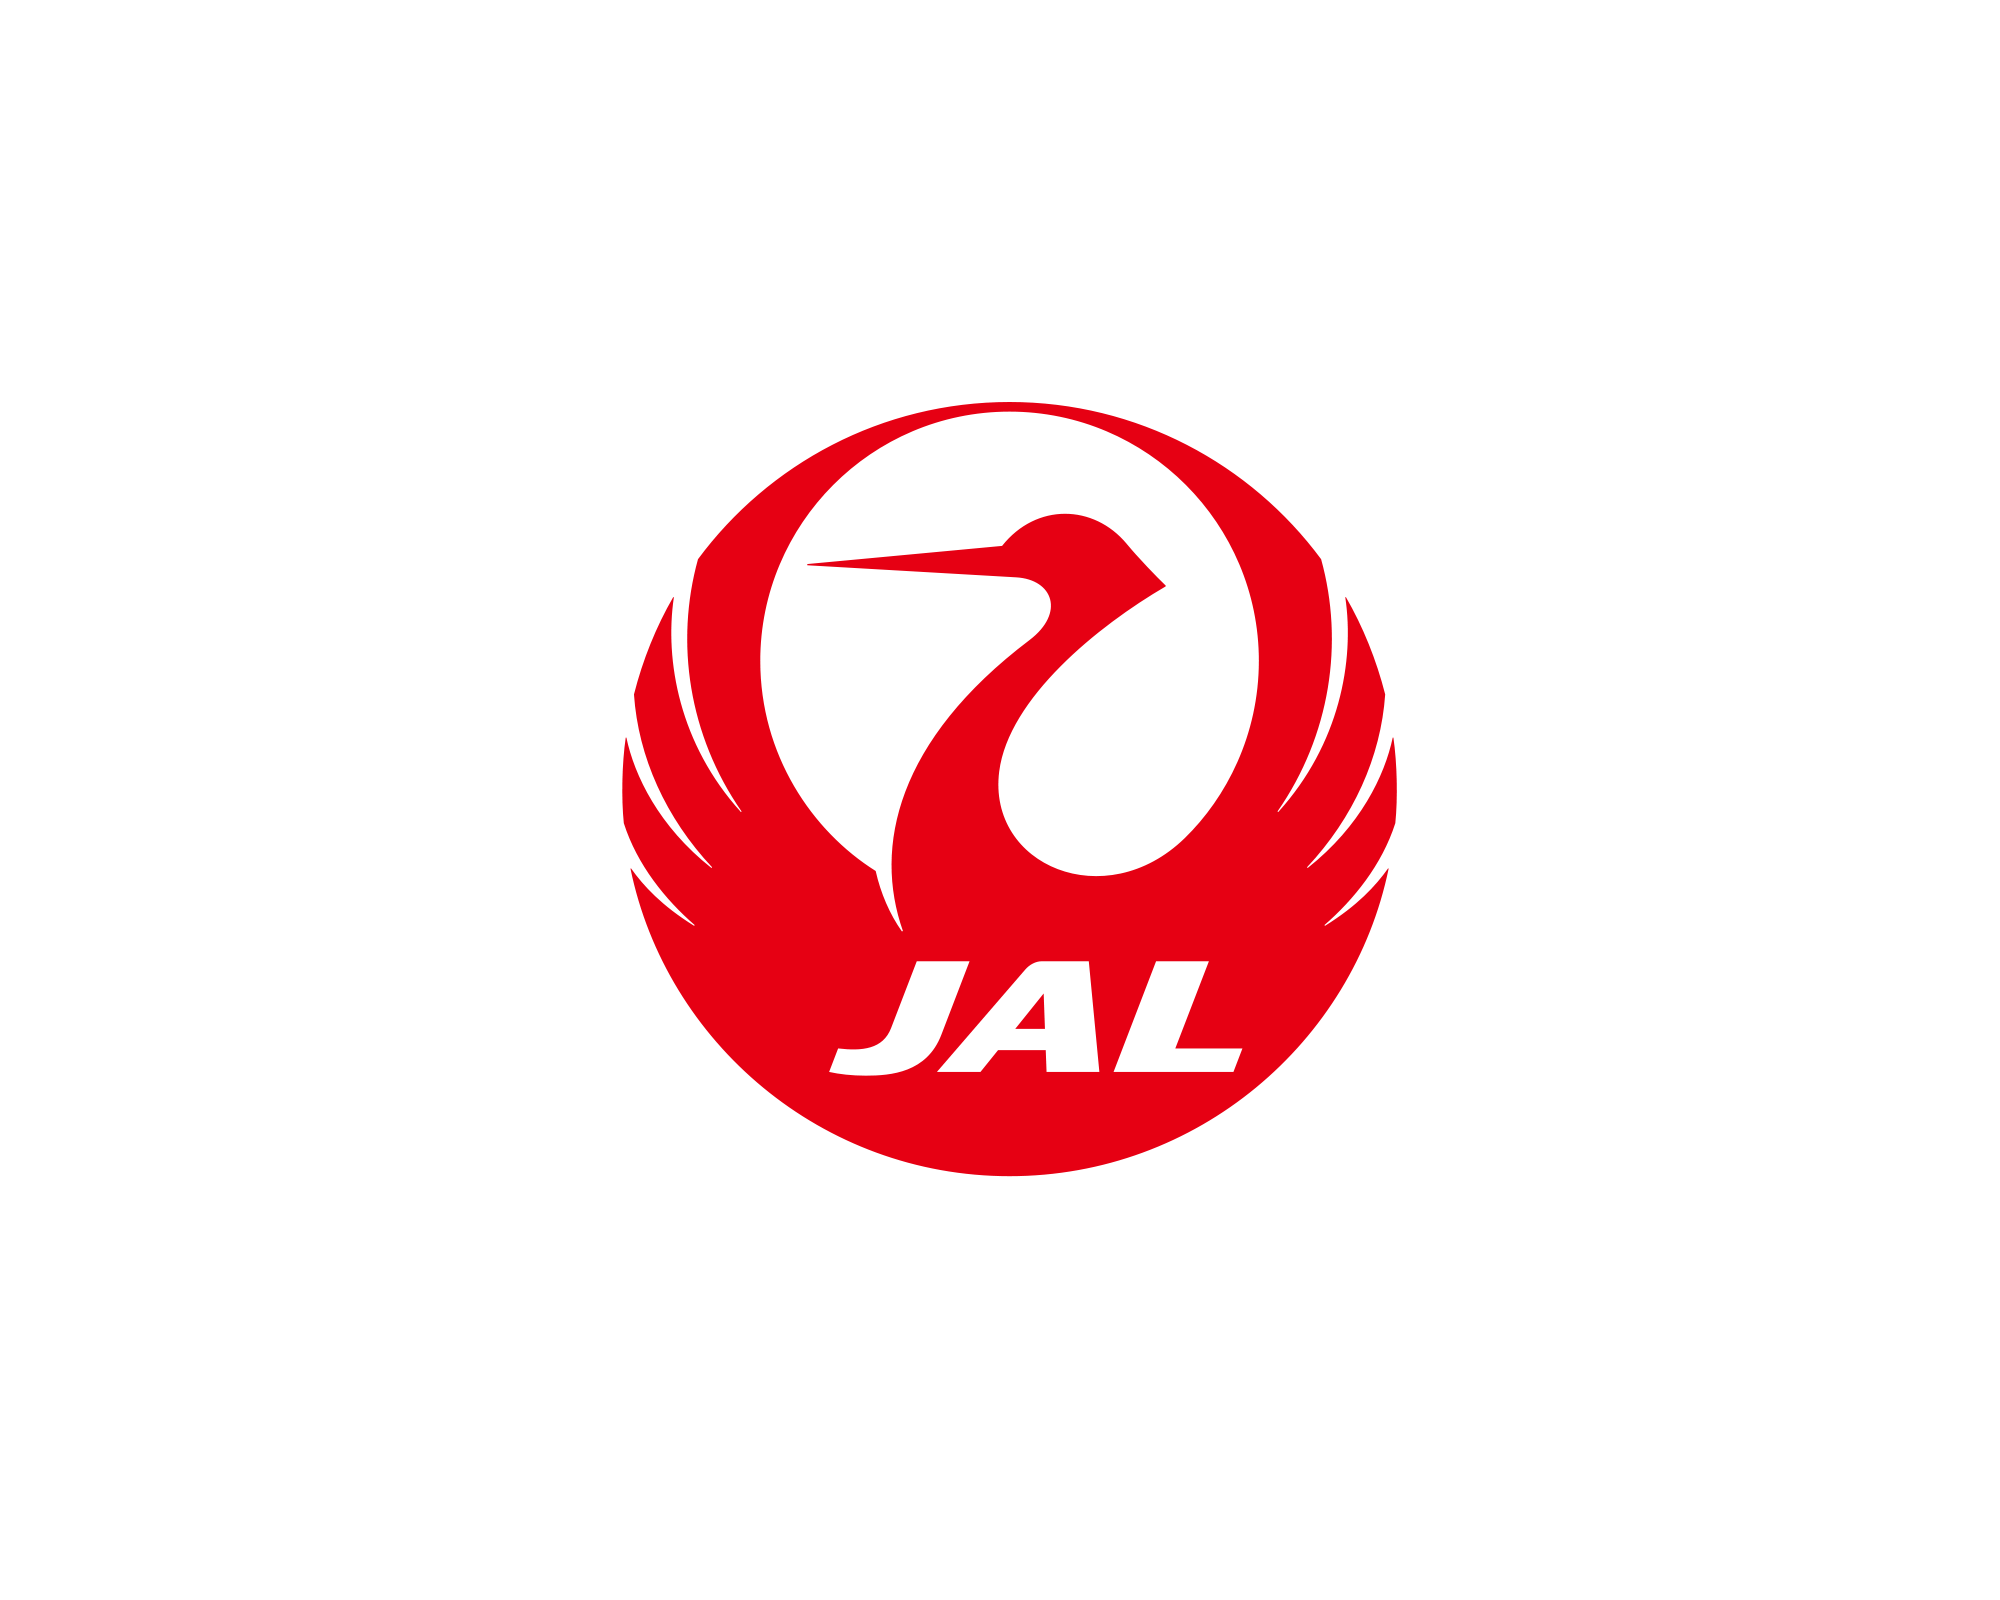 White with Red Swan in Circle Logo - Japan Airlines logo